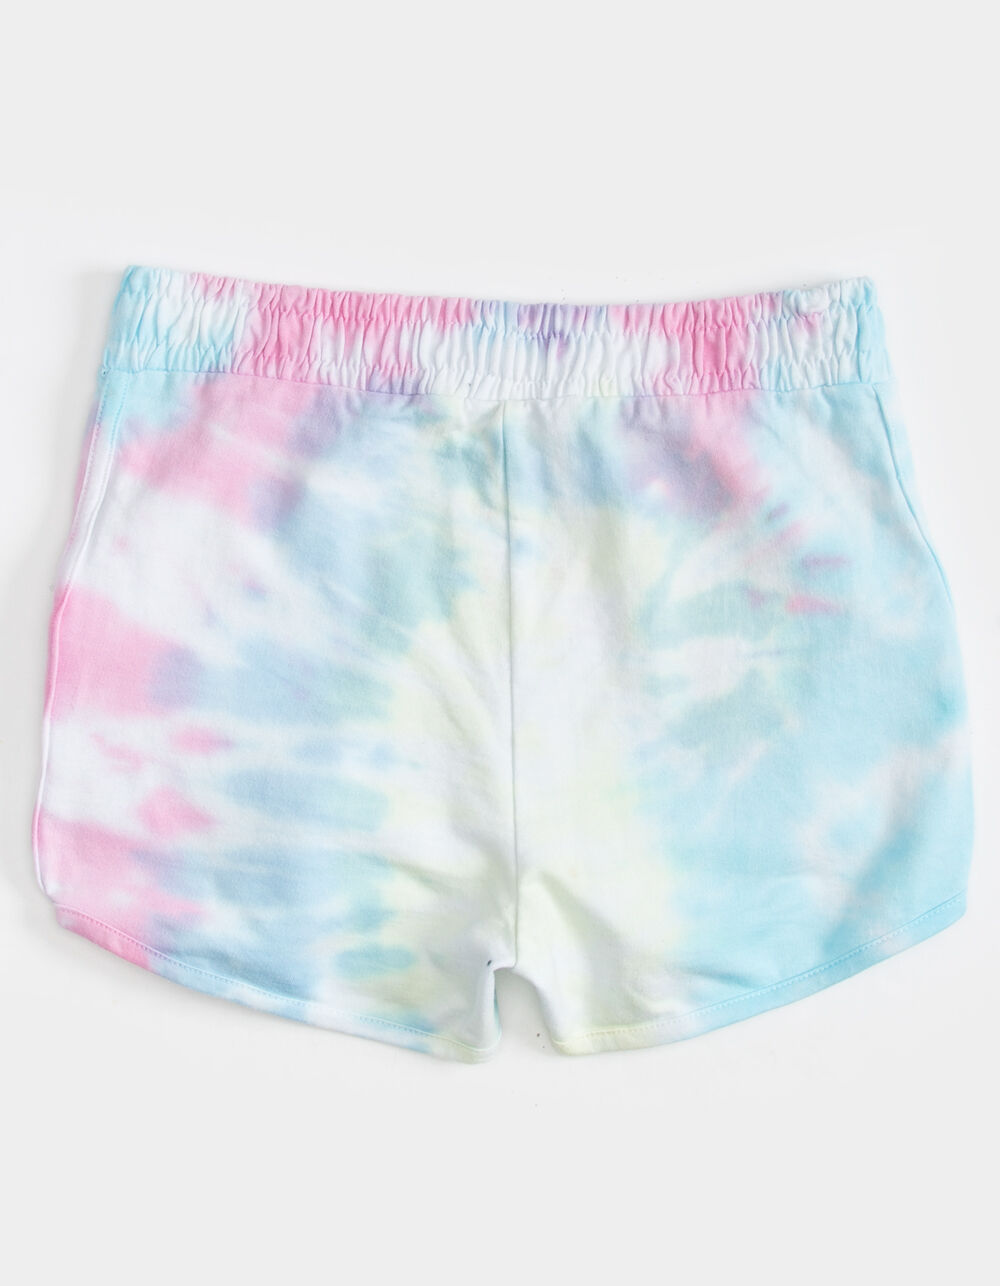 MAUI AND SONS Tie Dye Girls Dolphin Shorts - MULTI | Tillys